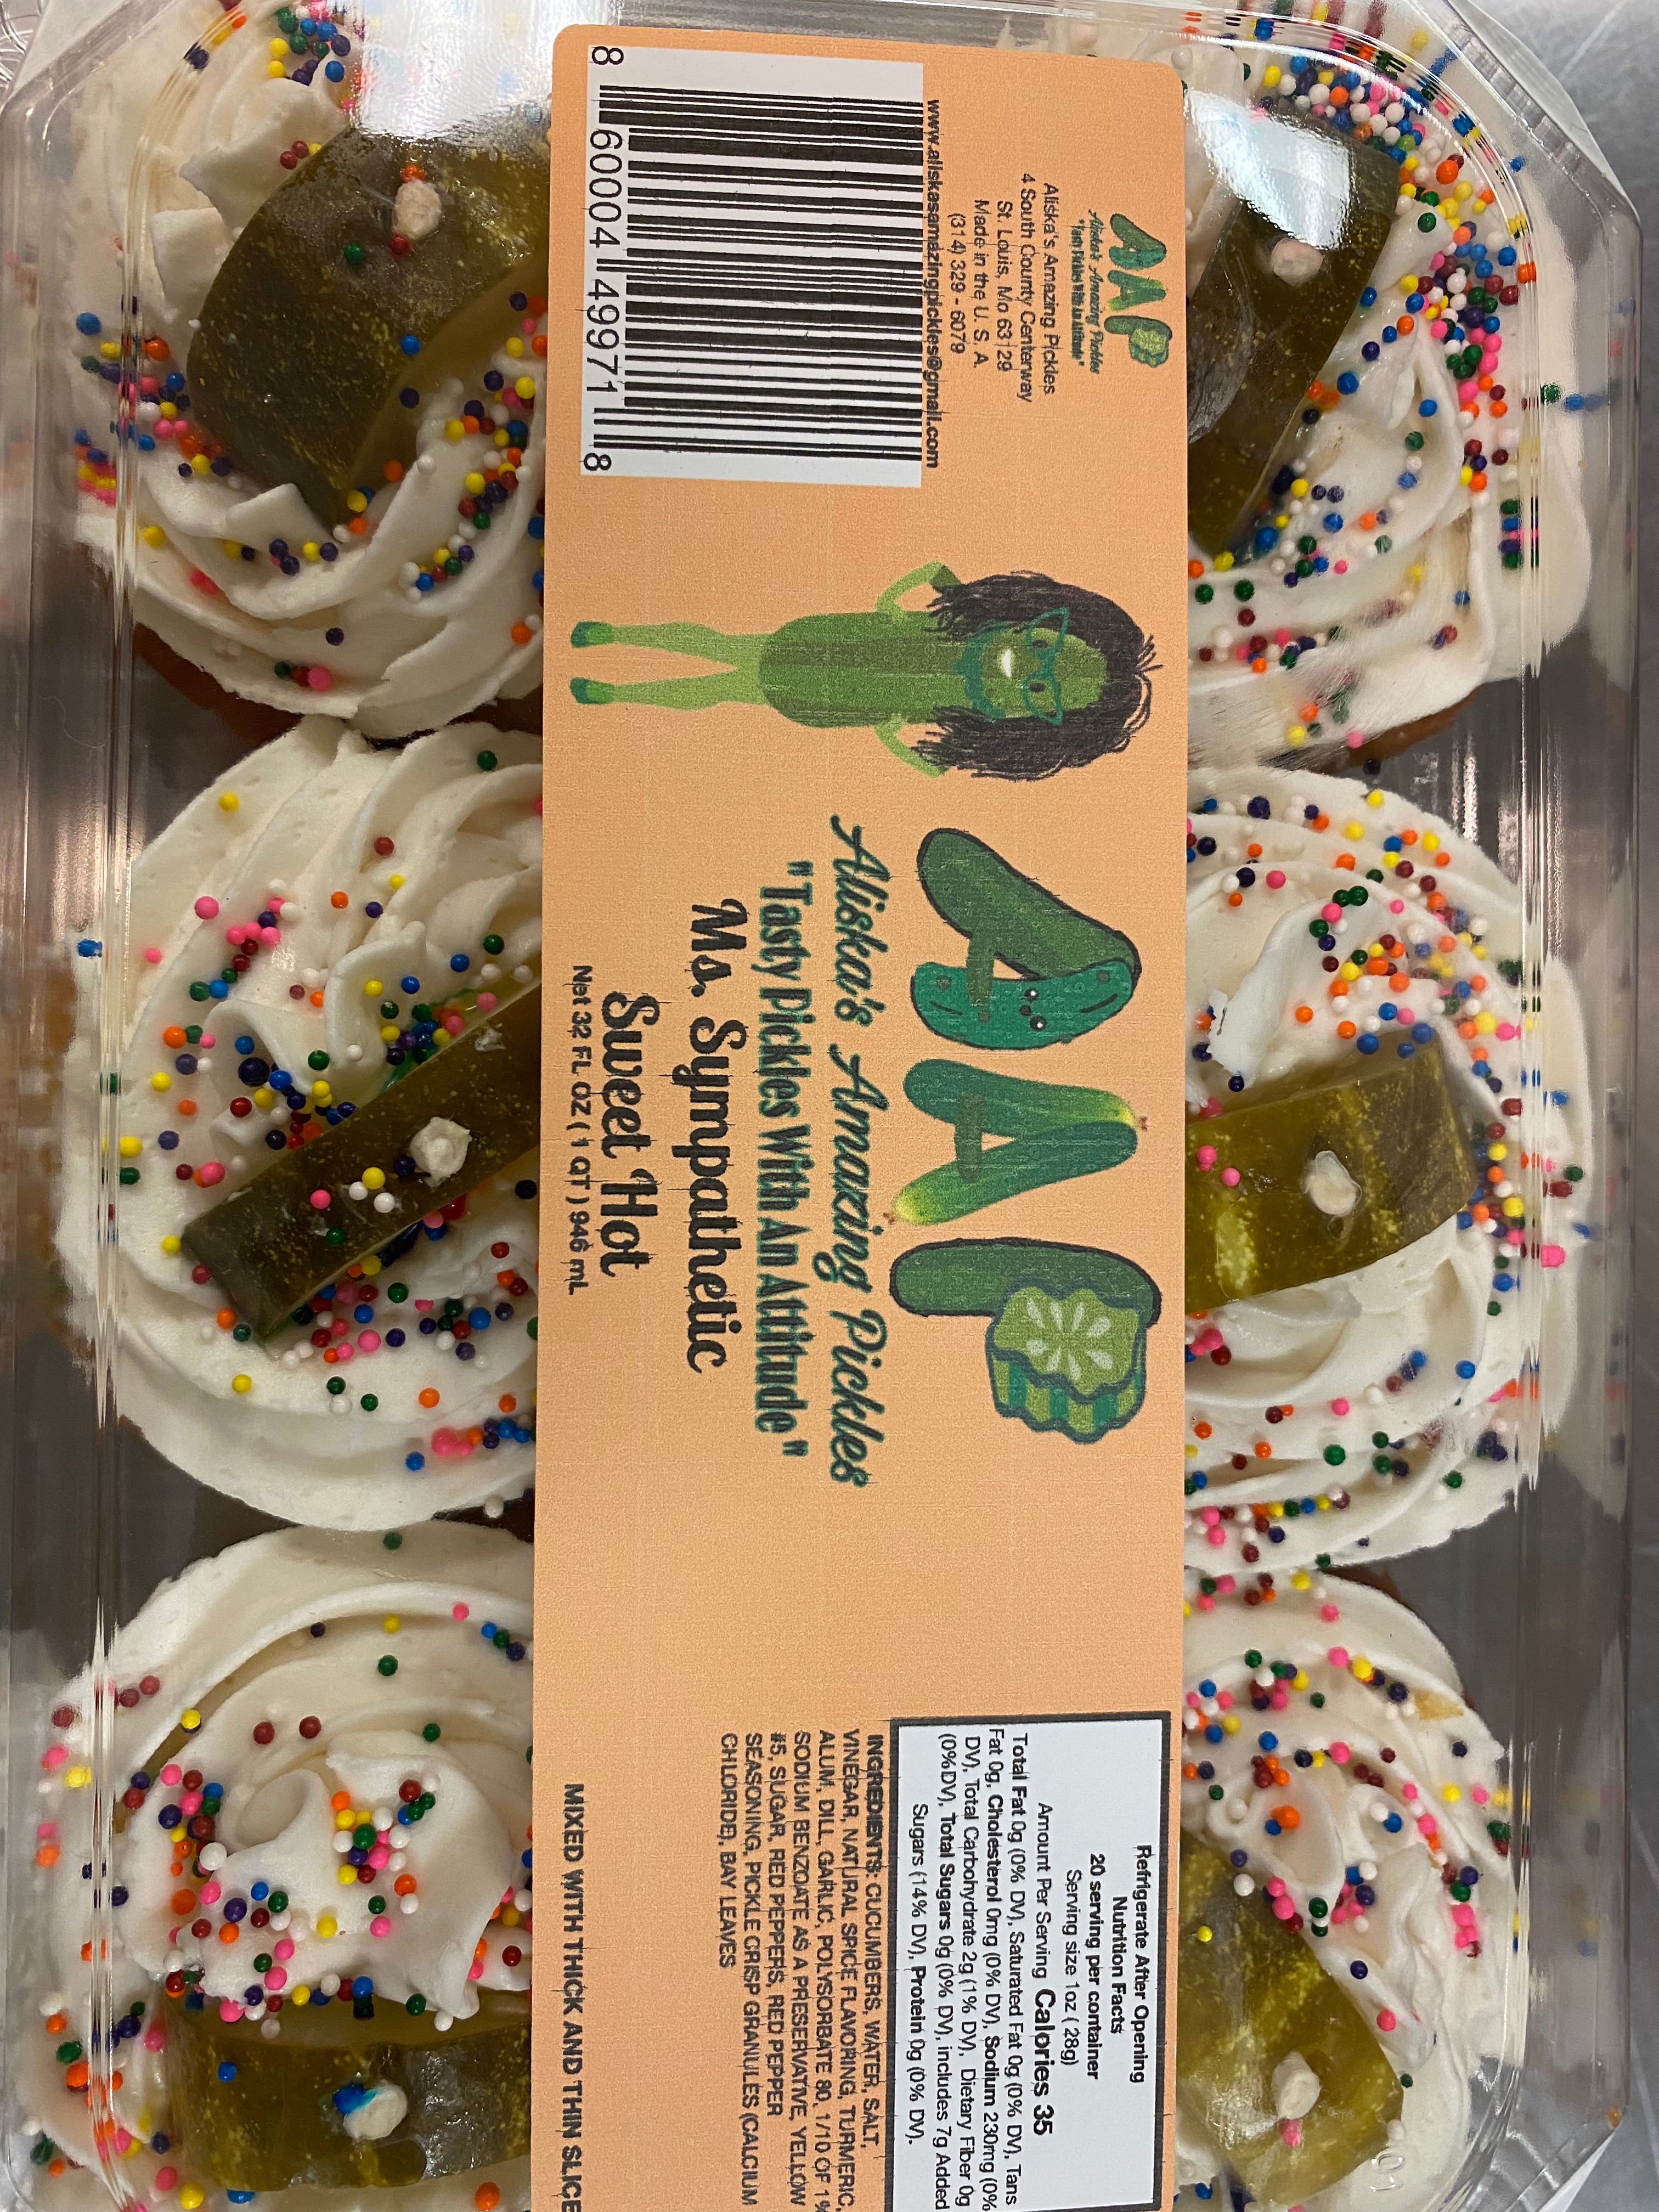 Pickle Flavored Cupcakes